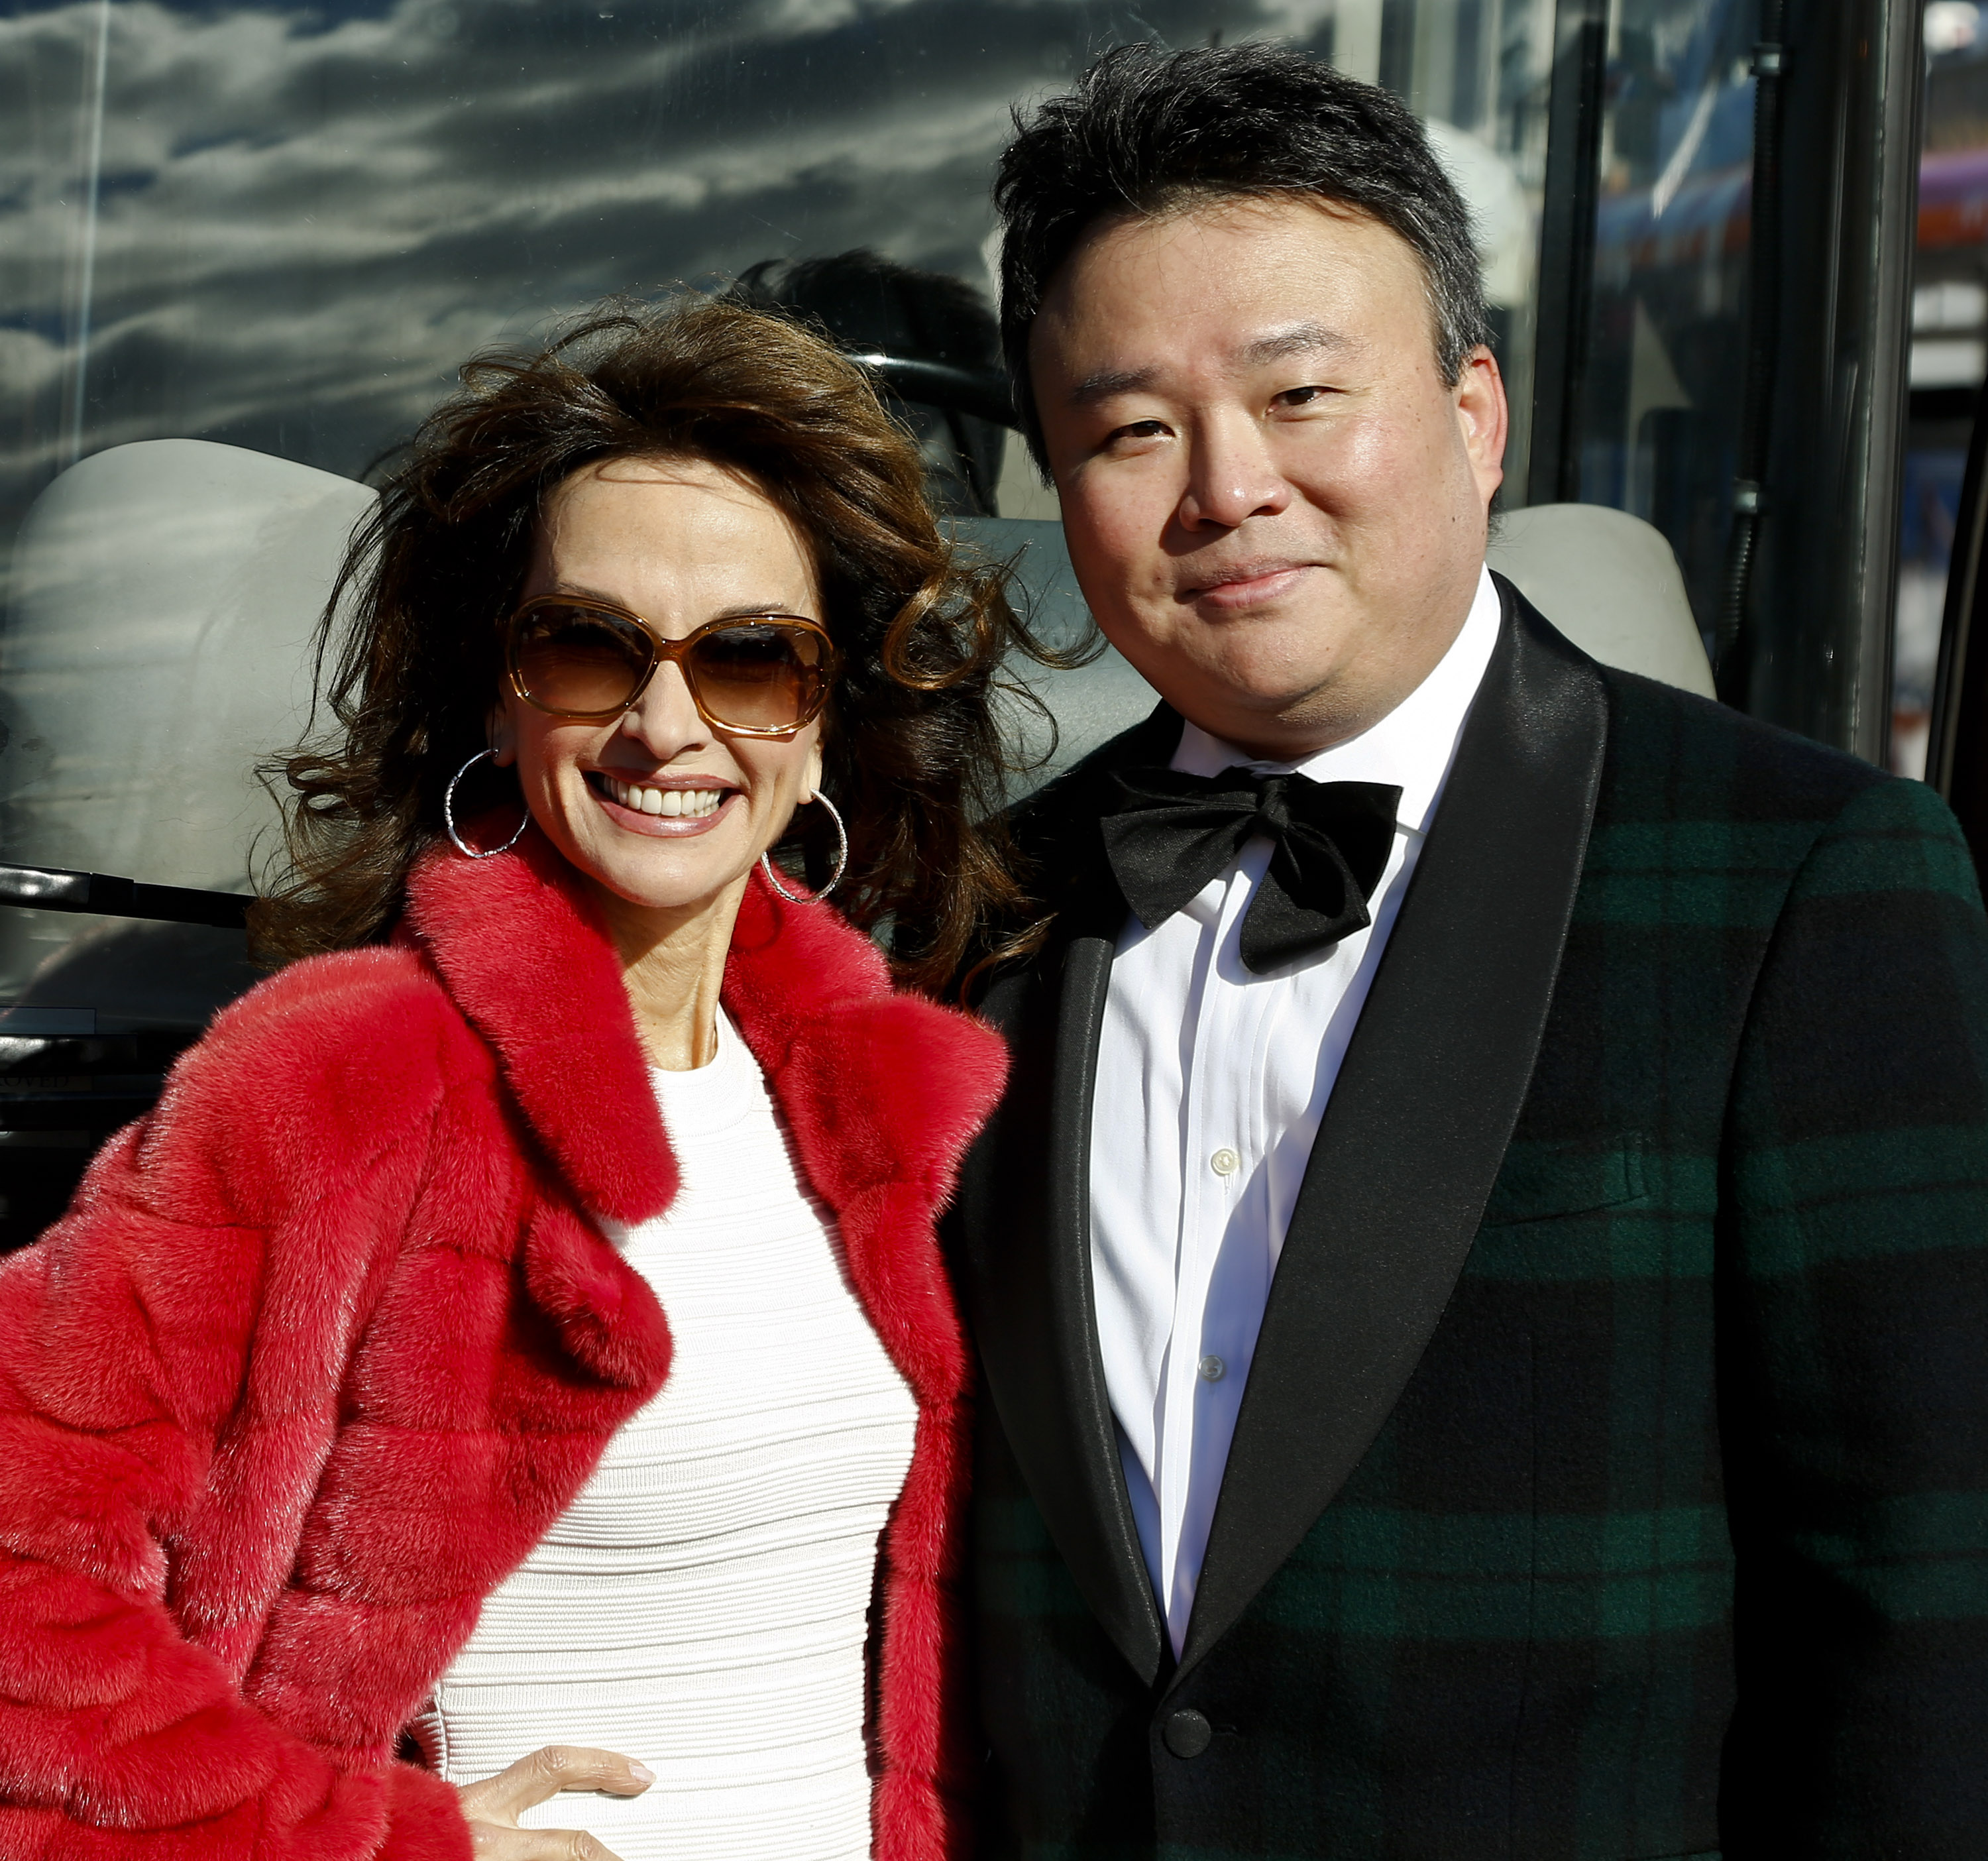 David W. Chien with Susan Lucci at Ride of Fame (November 19th, 2013).